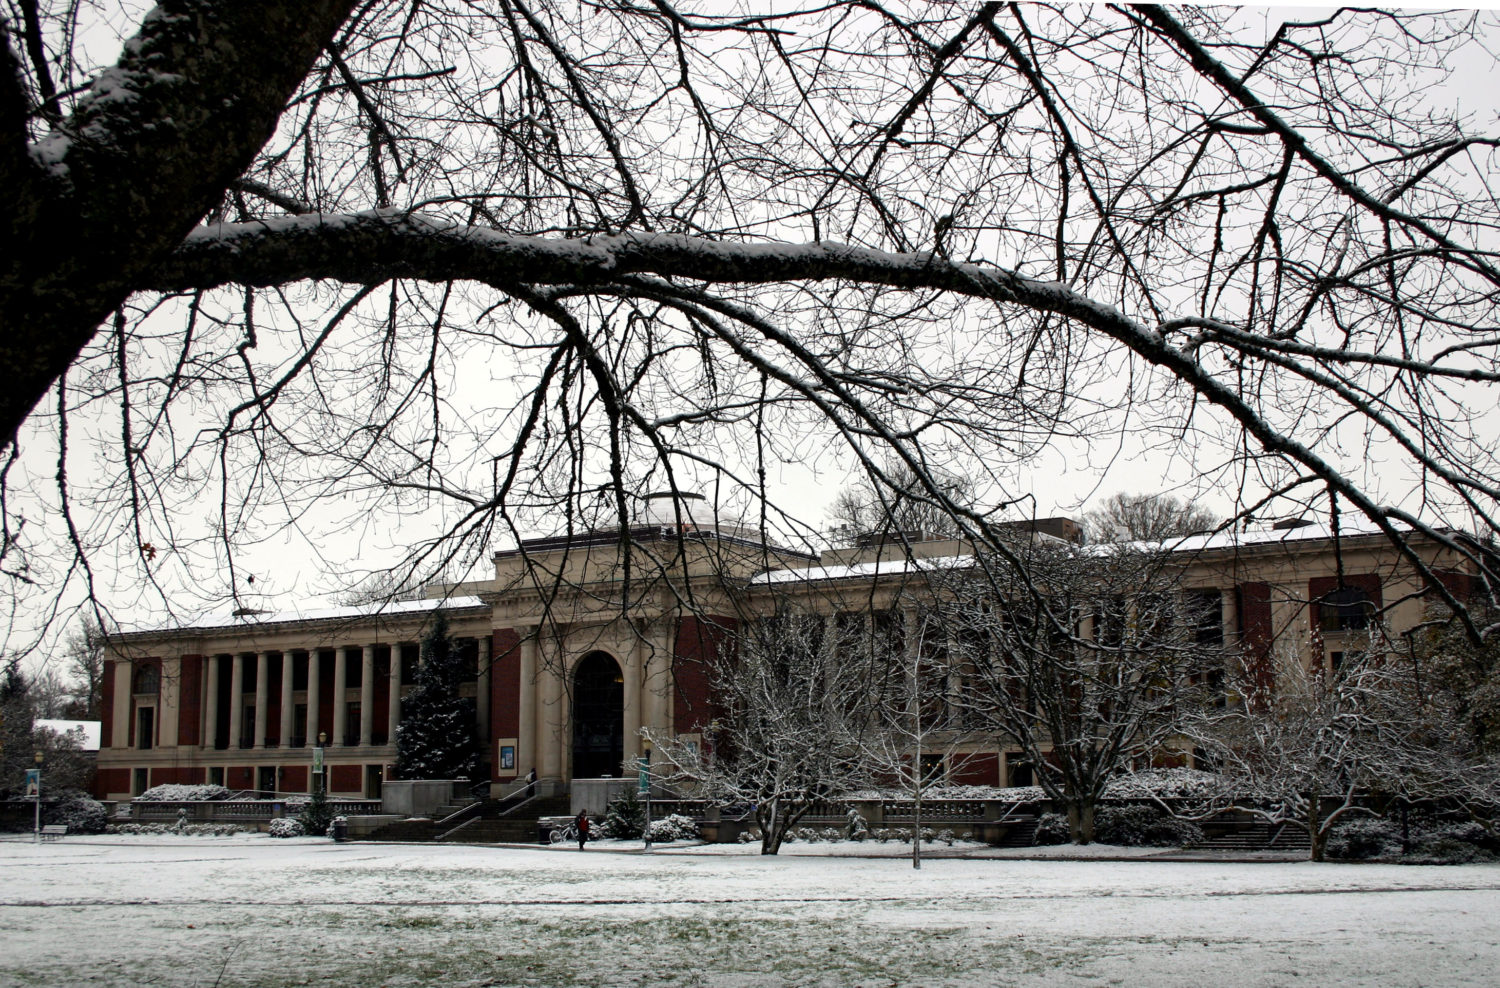 An image shows the memorial union building at OSU covered in snow.